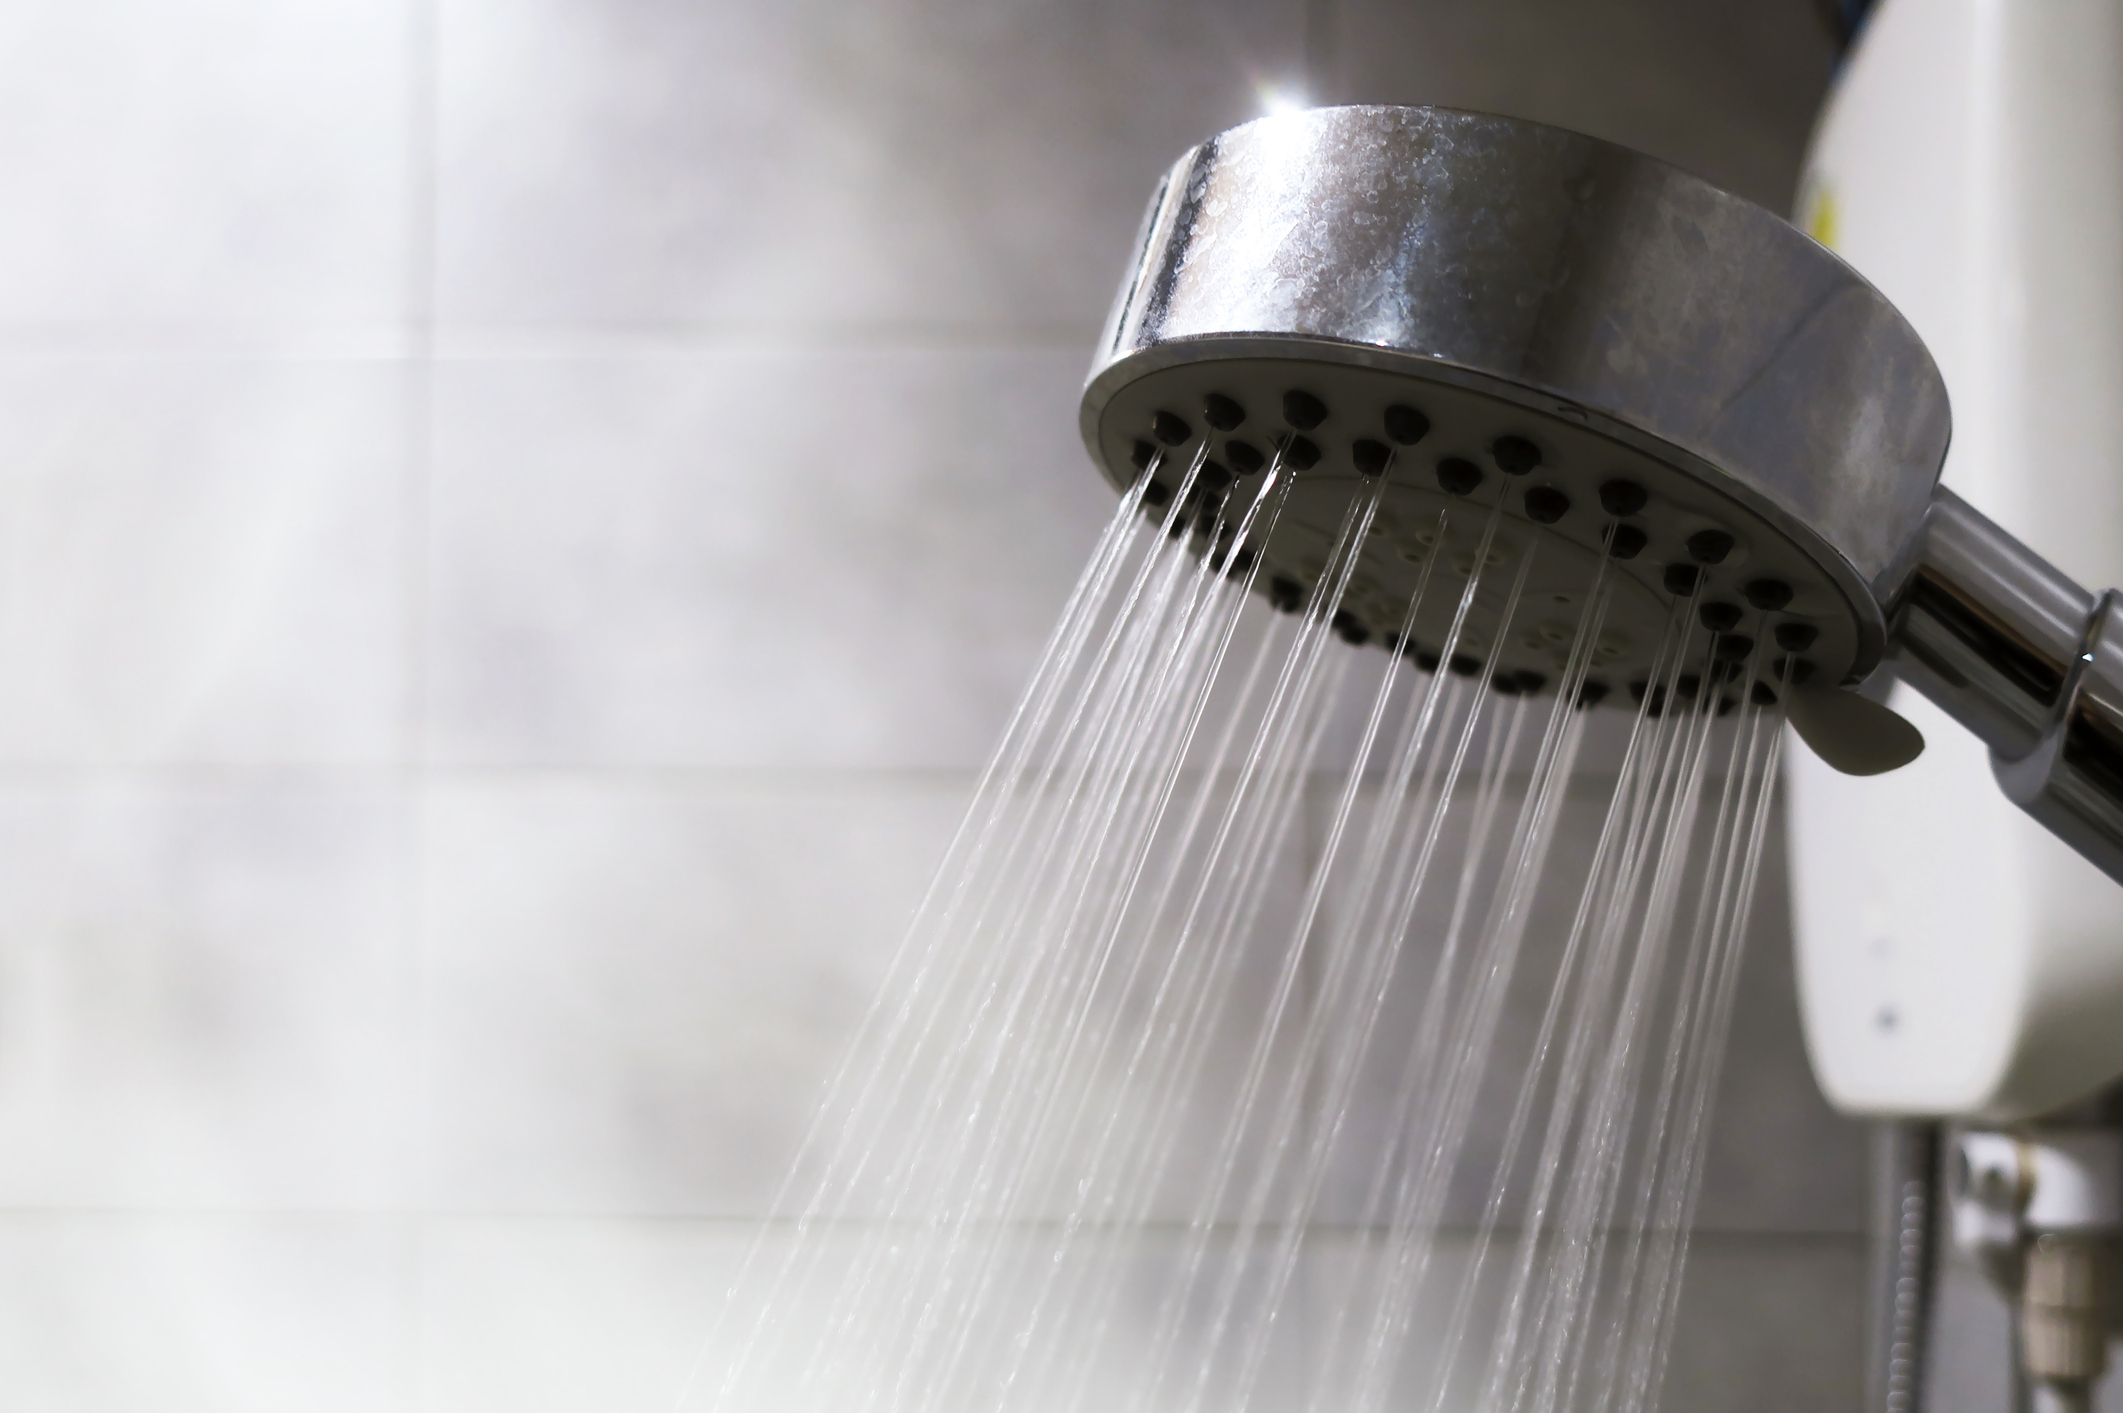 Water flows from a showerhead against a tiled wall background